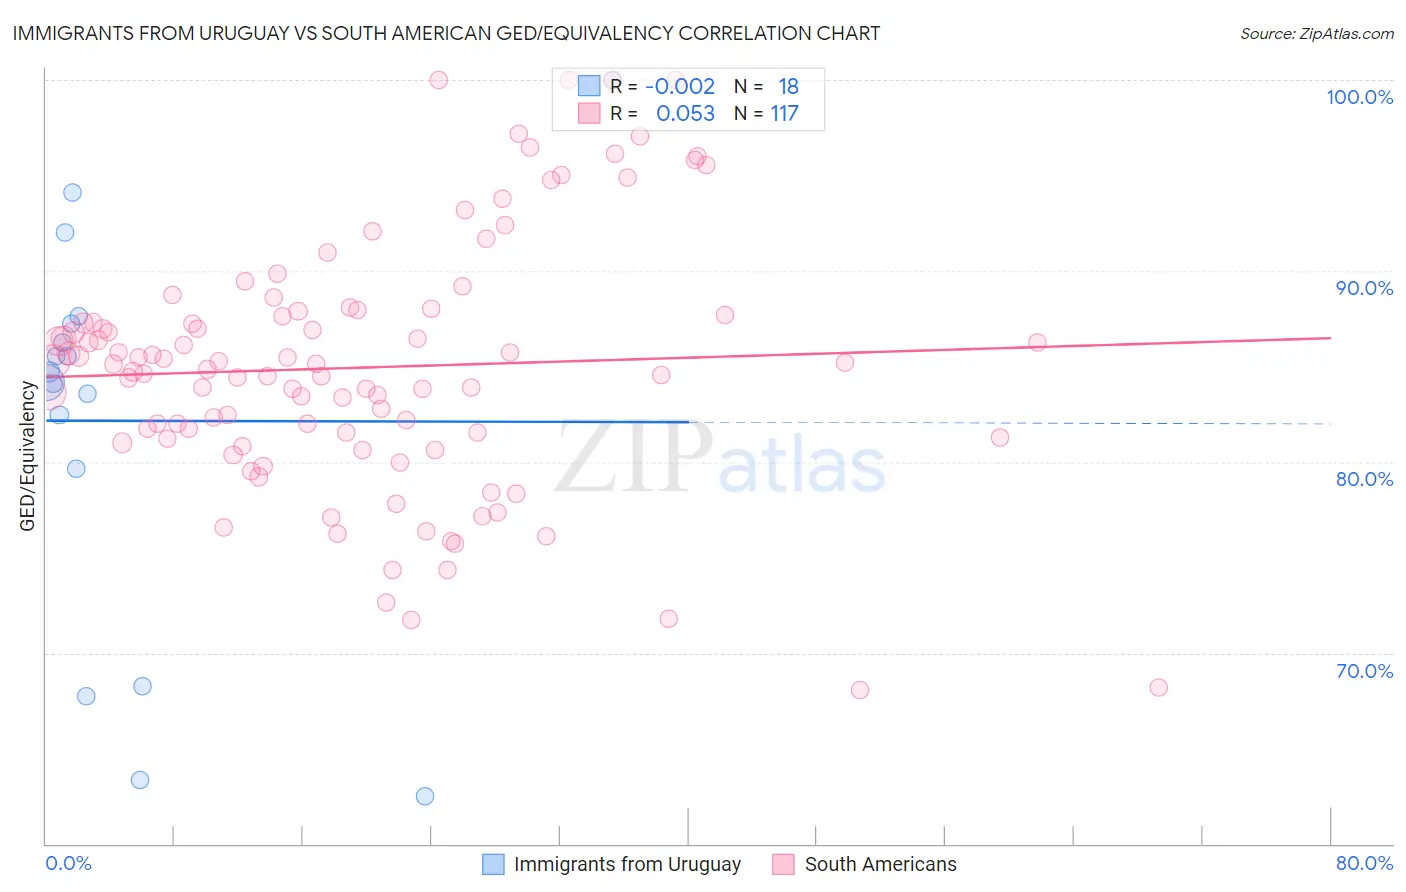 Immigrants from Uruguay vs South American GED/Equivalency